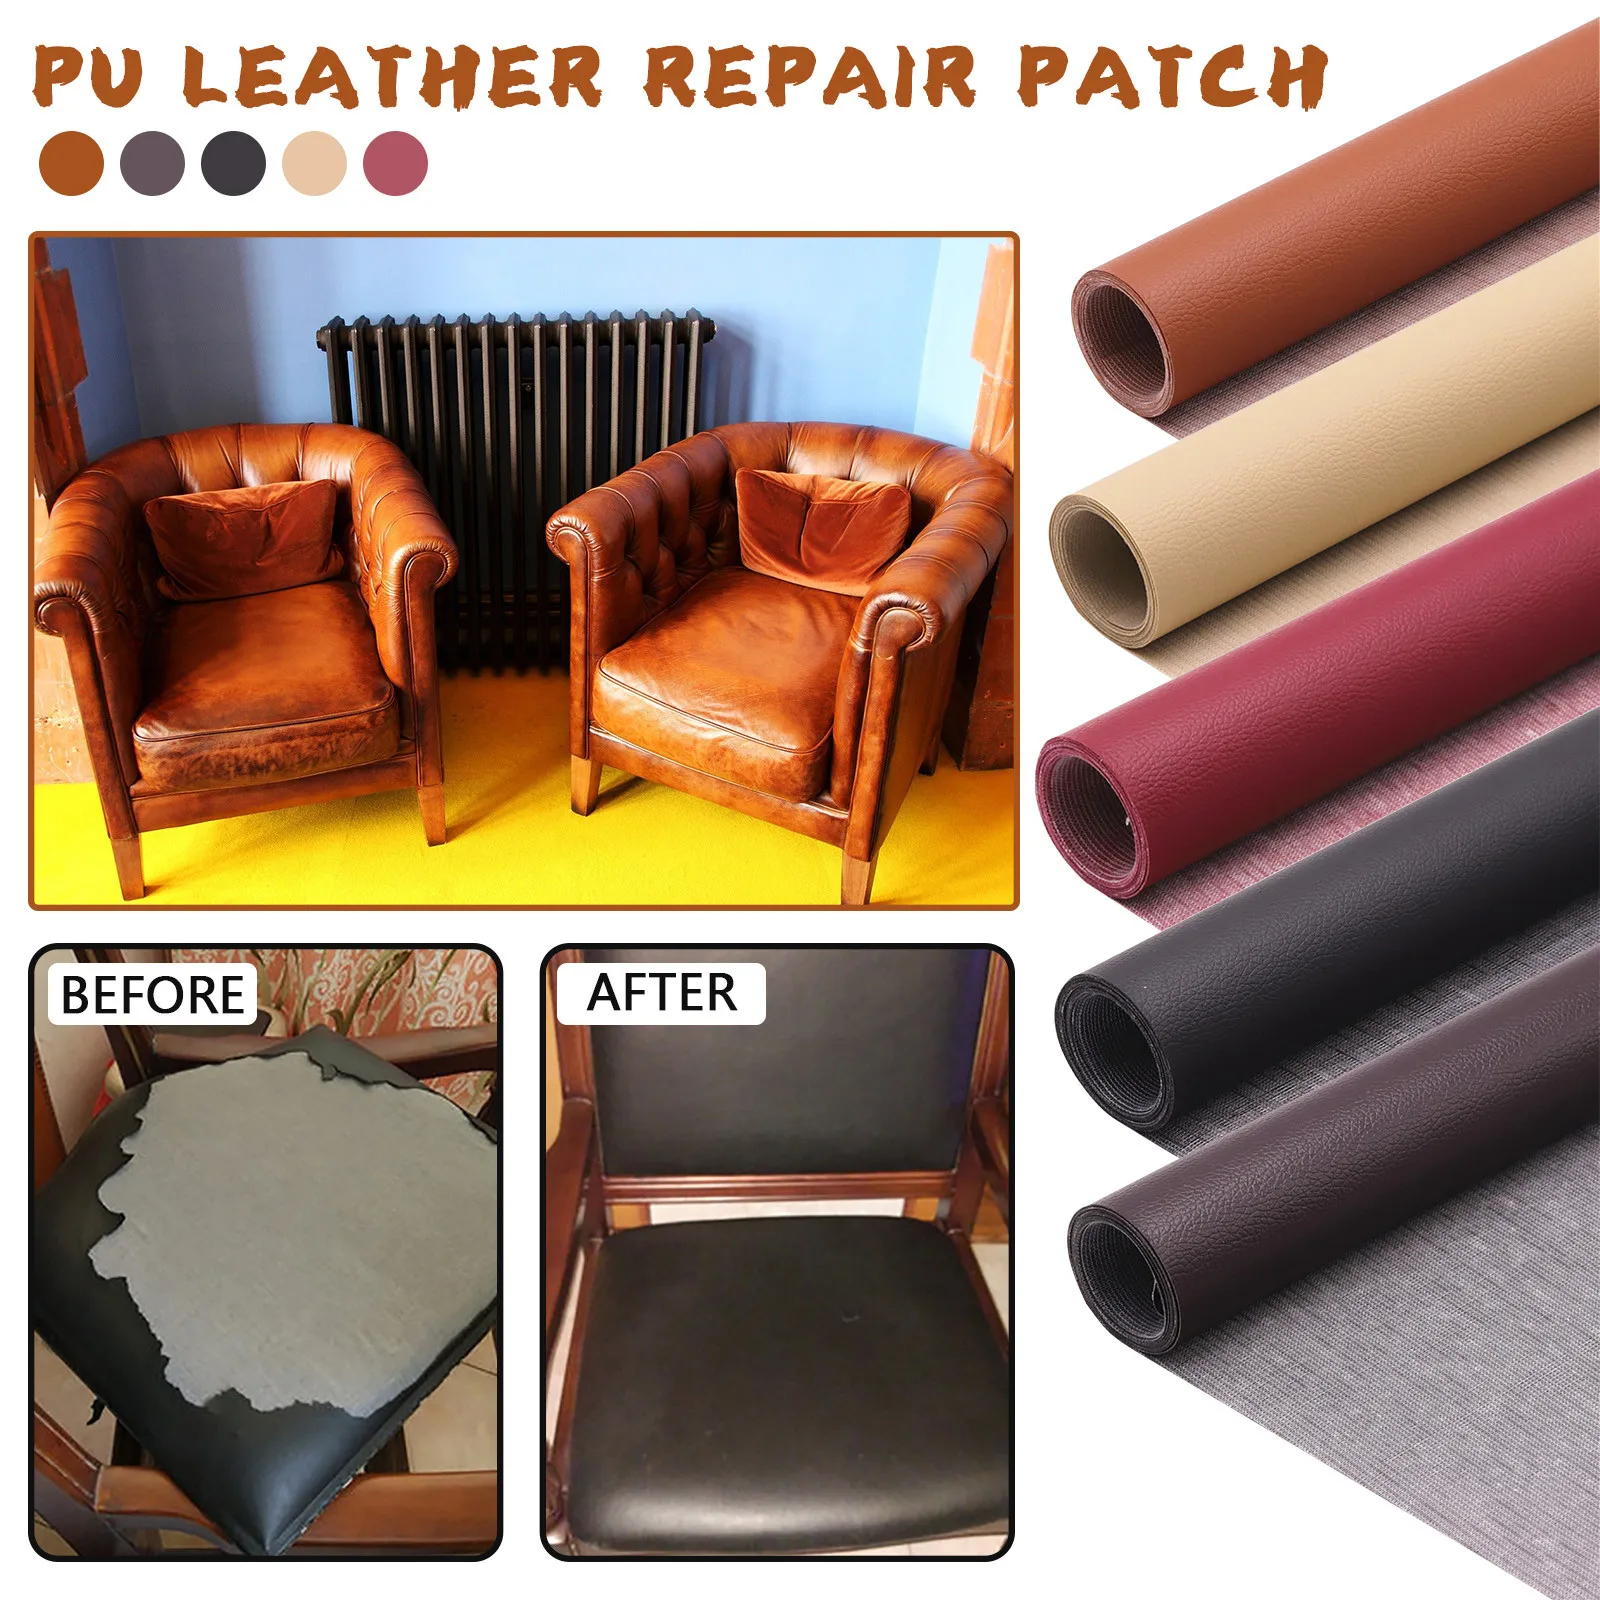 Self-Adhesive Leather Repair Patch Couch Leather Sofas Car Seats Repair Tape New 